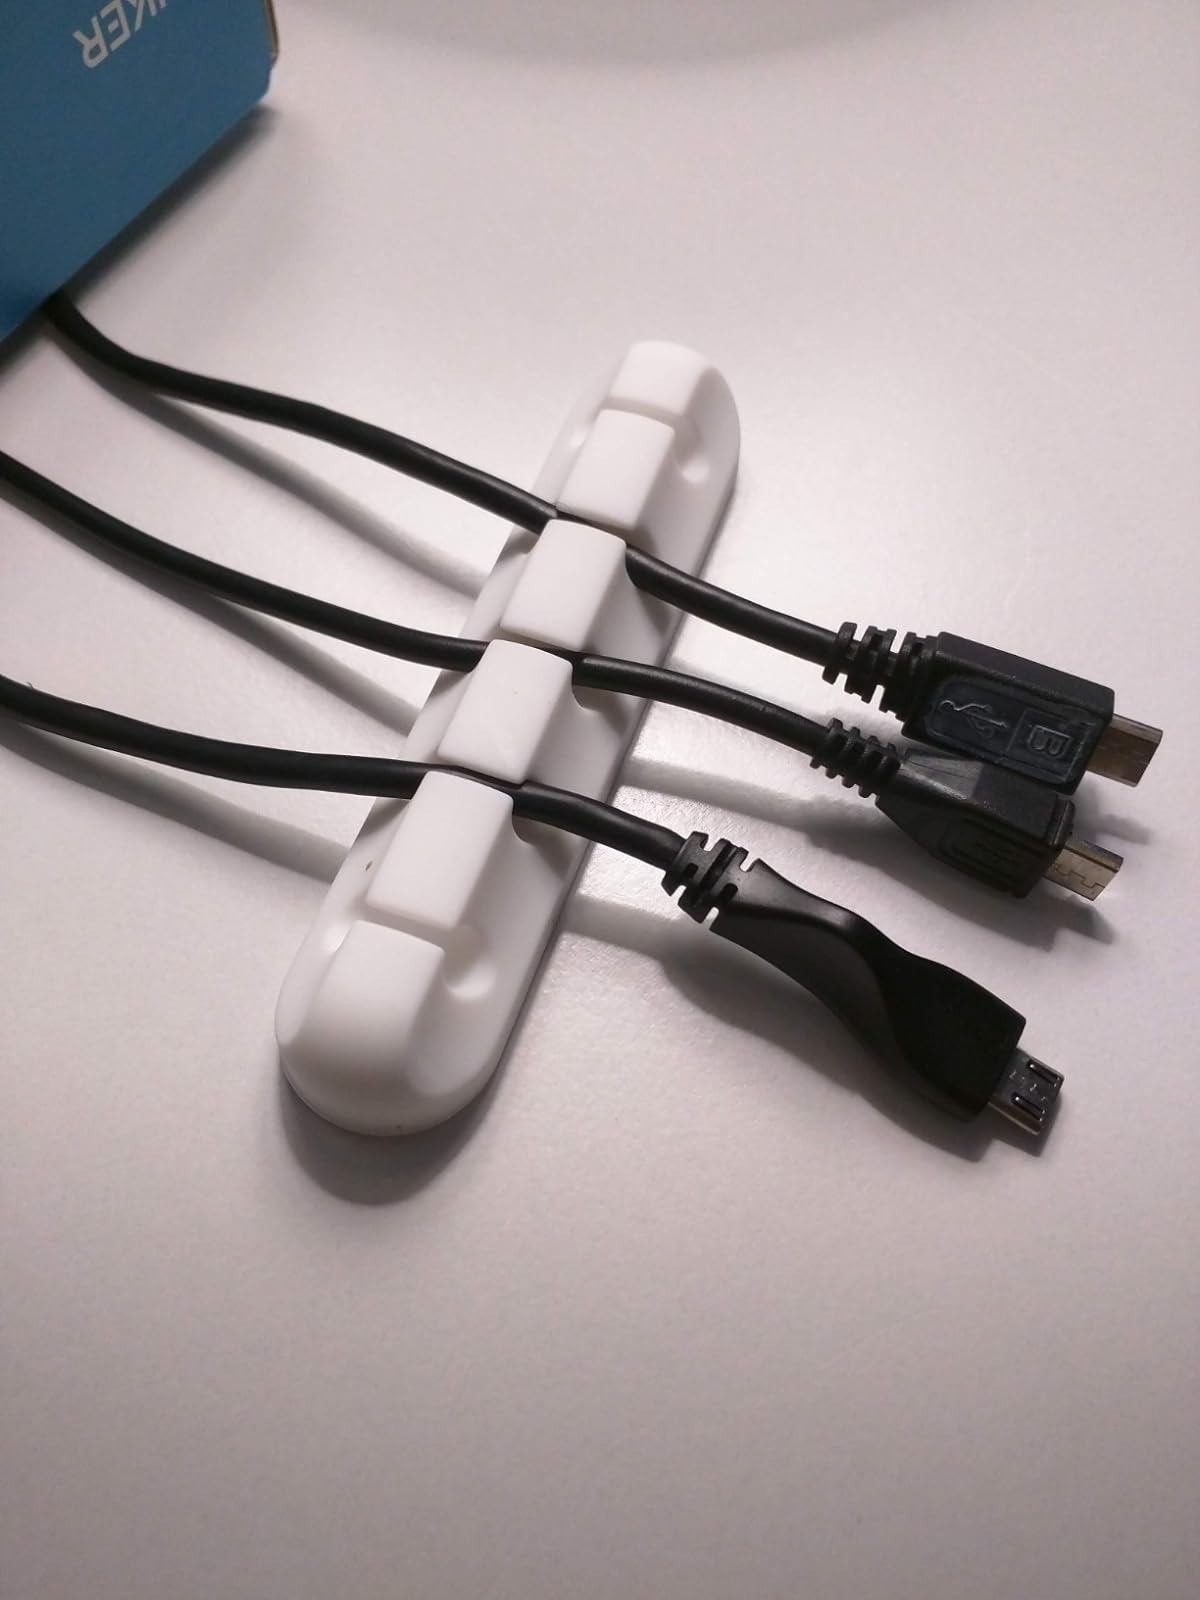 white cable organizer with black charging cables on desk